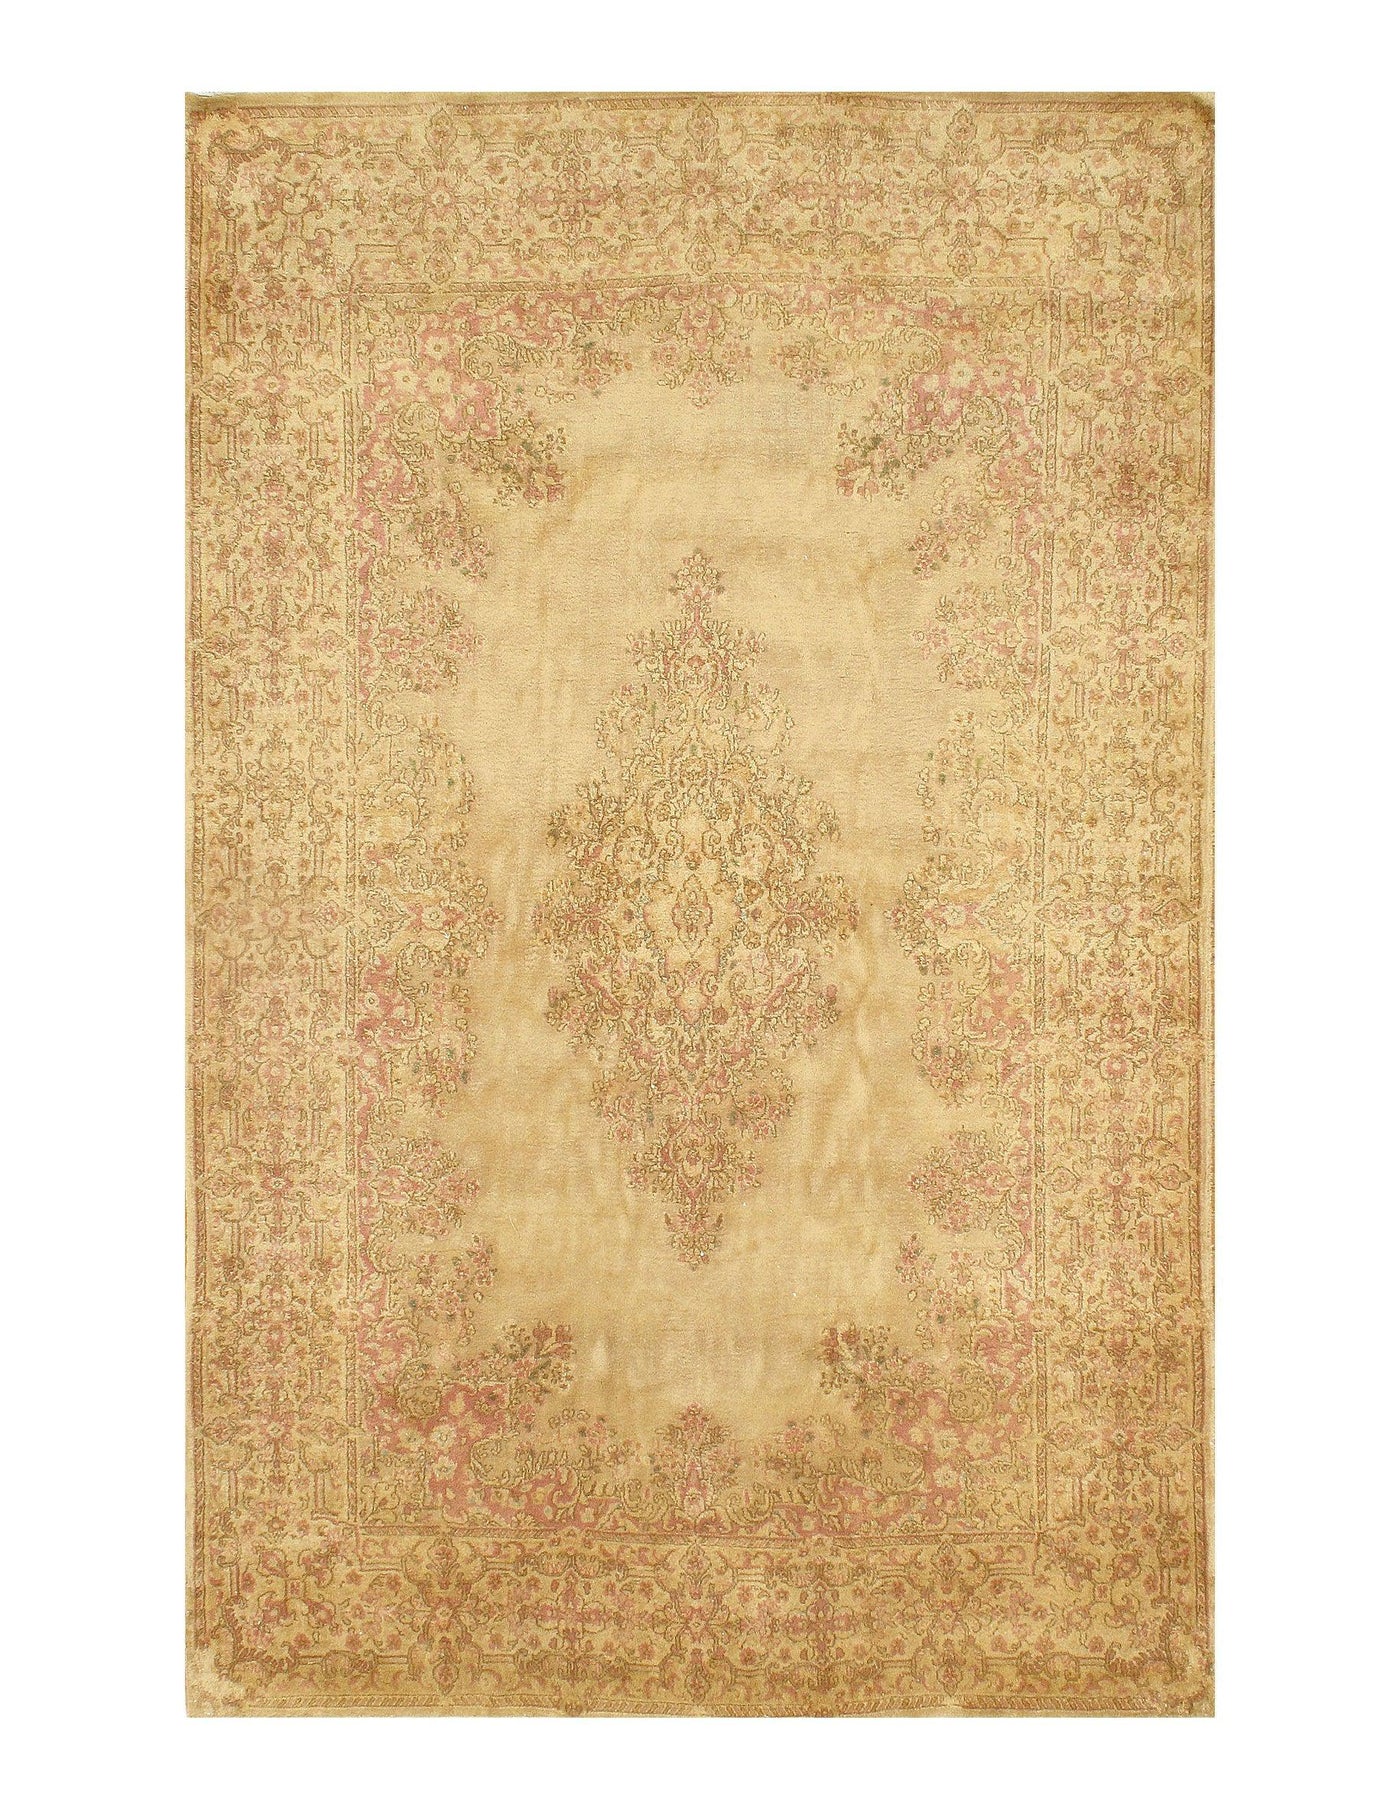 Canvello Persian Kerman Gold And Ivory Rug - 5'11'' X 9' 4''